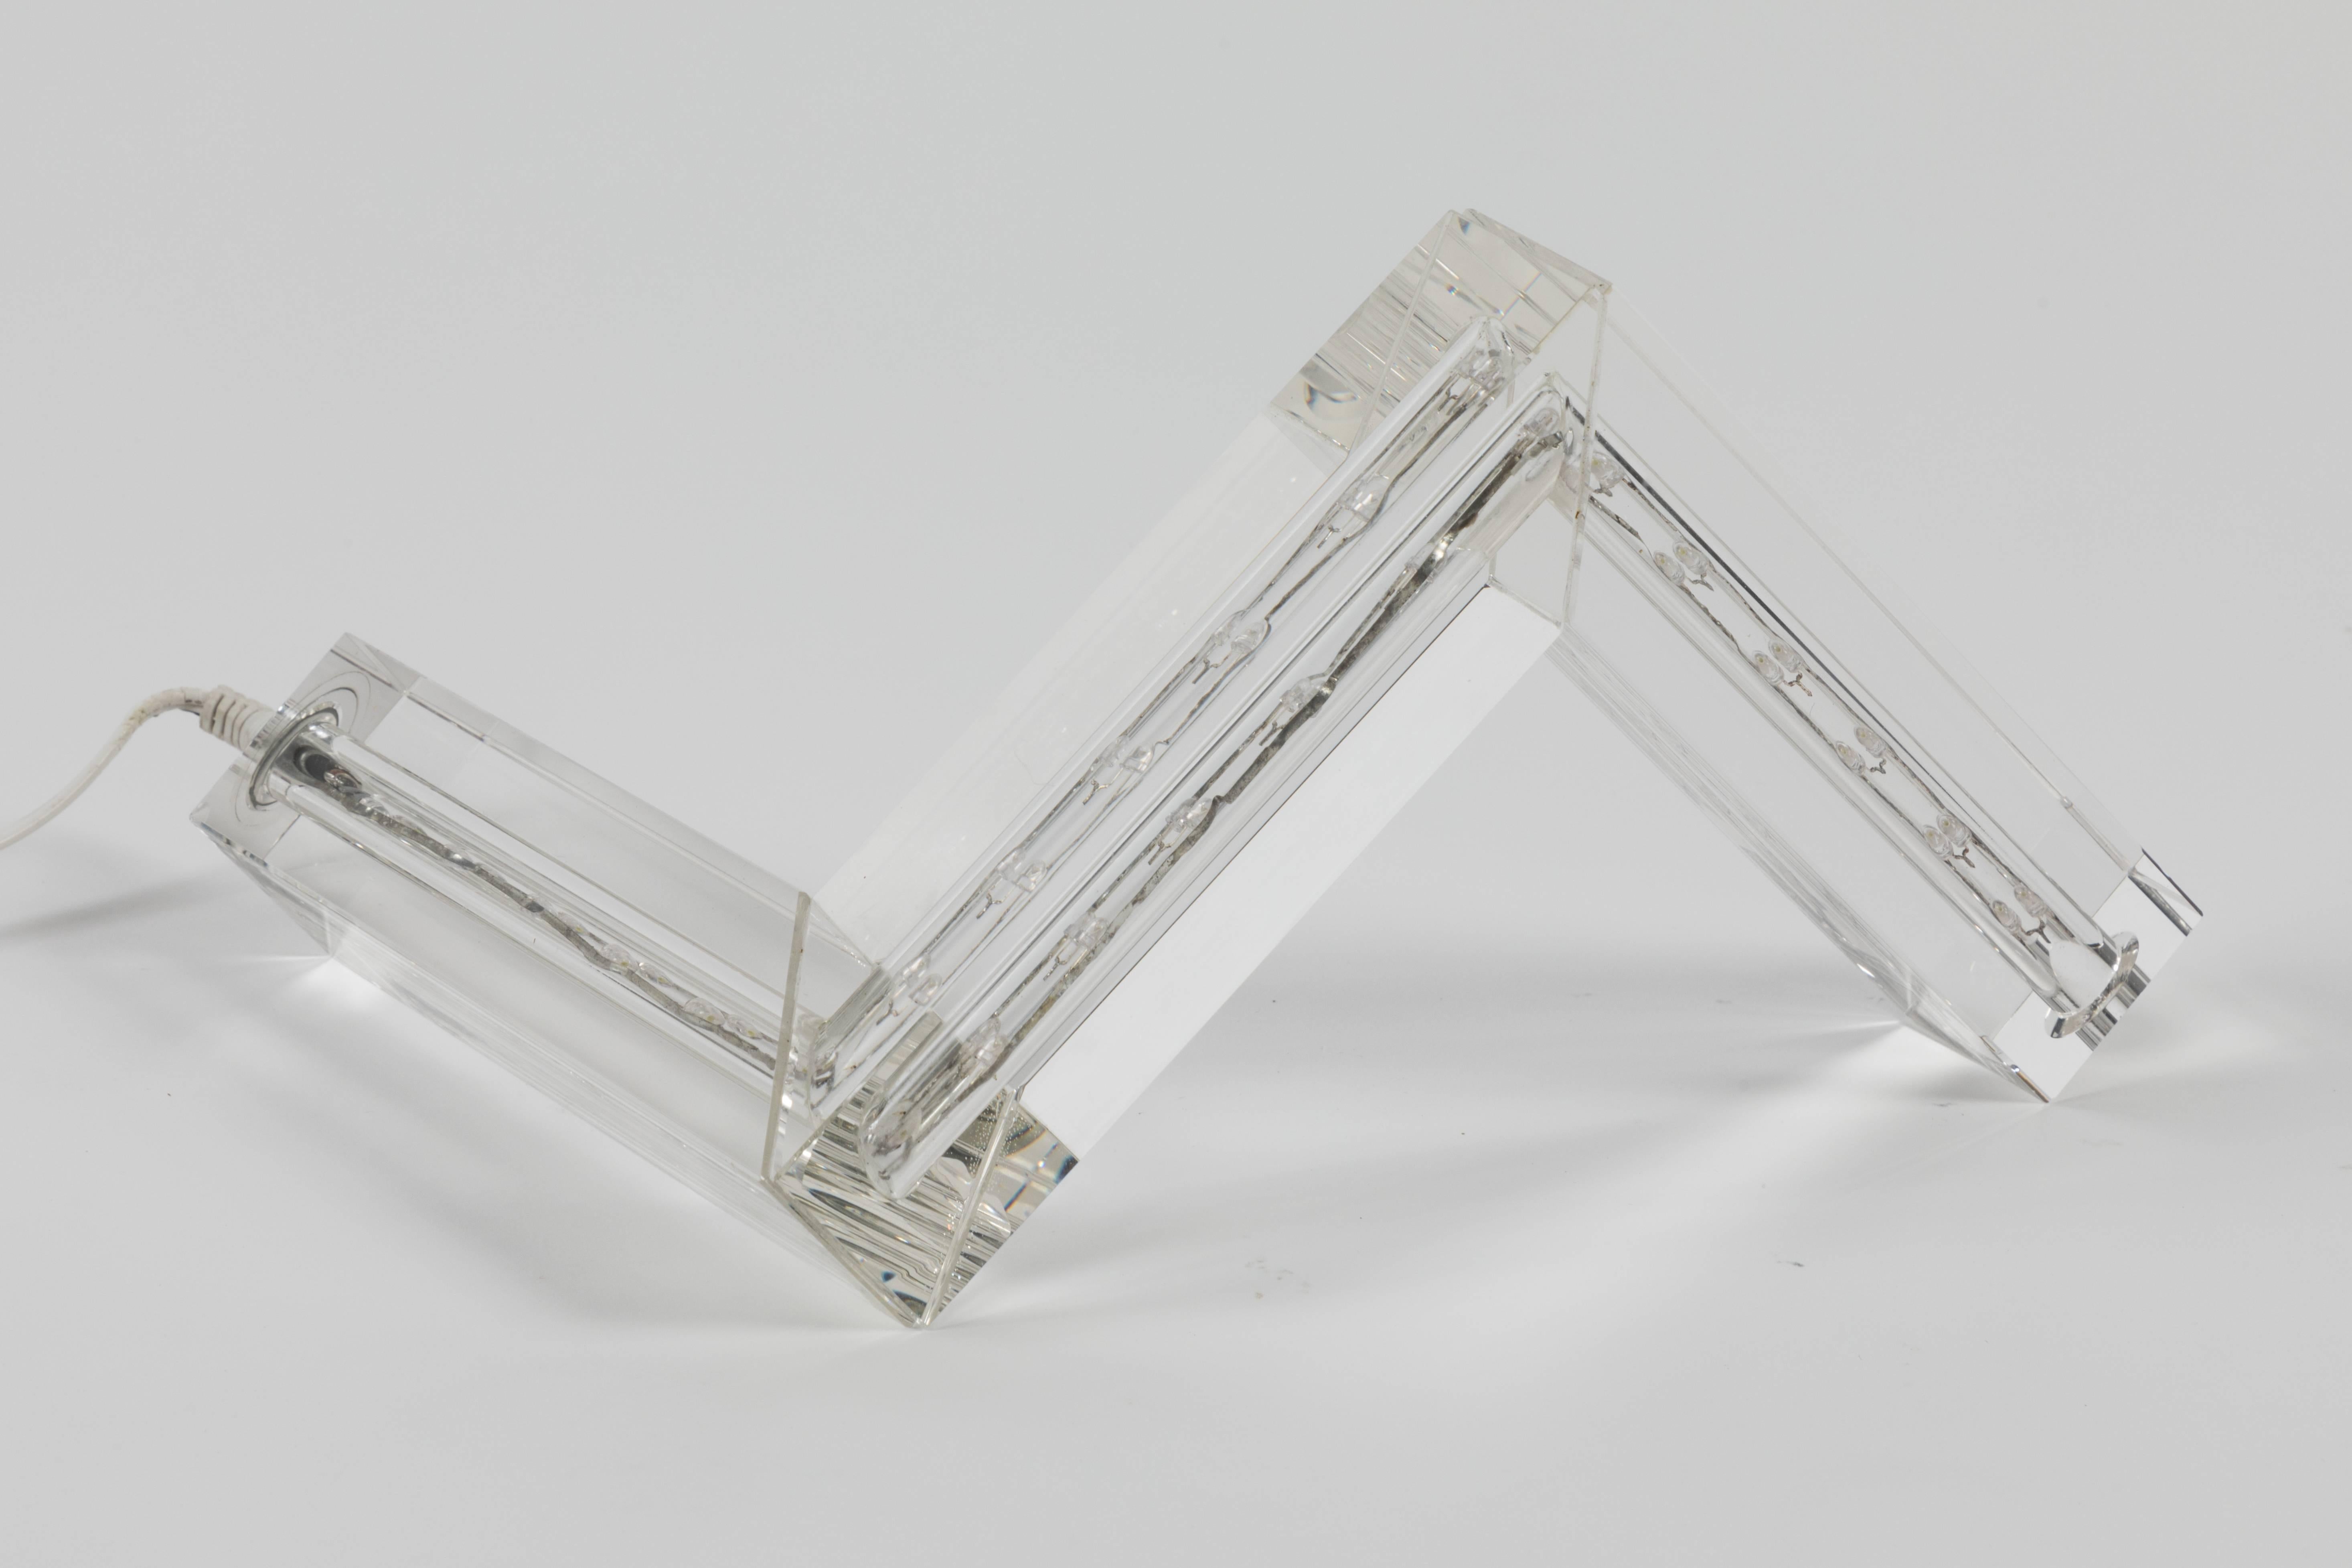 A vintage and elegant geometric zig zag crystal table lamp with a string of LED lights. This spiffy little accent lamp can be included in any style interior.